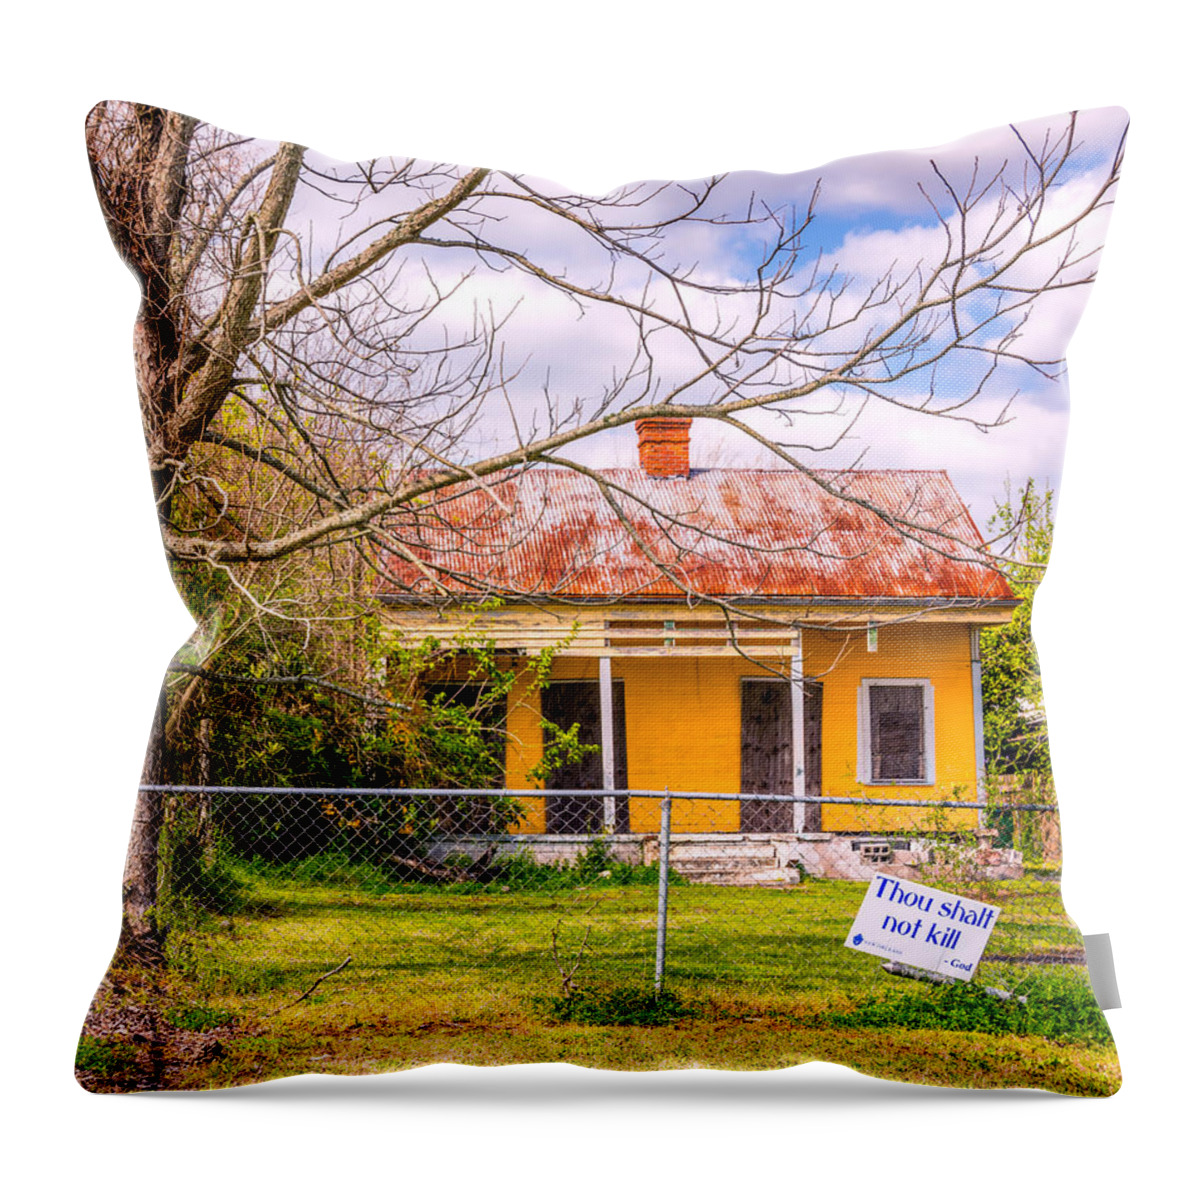 God Throw Pillow featuring the photograph Promoting the Obvious by Steve Harrington